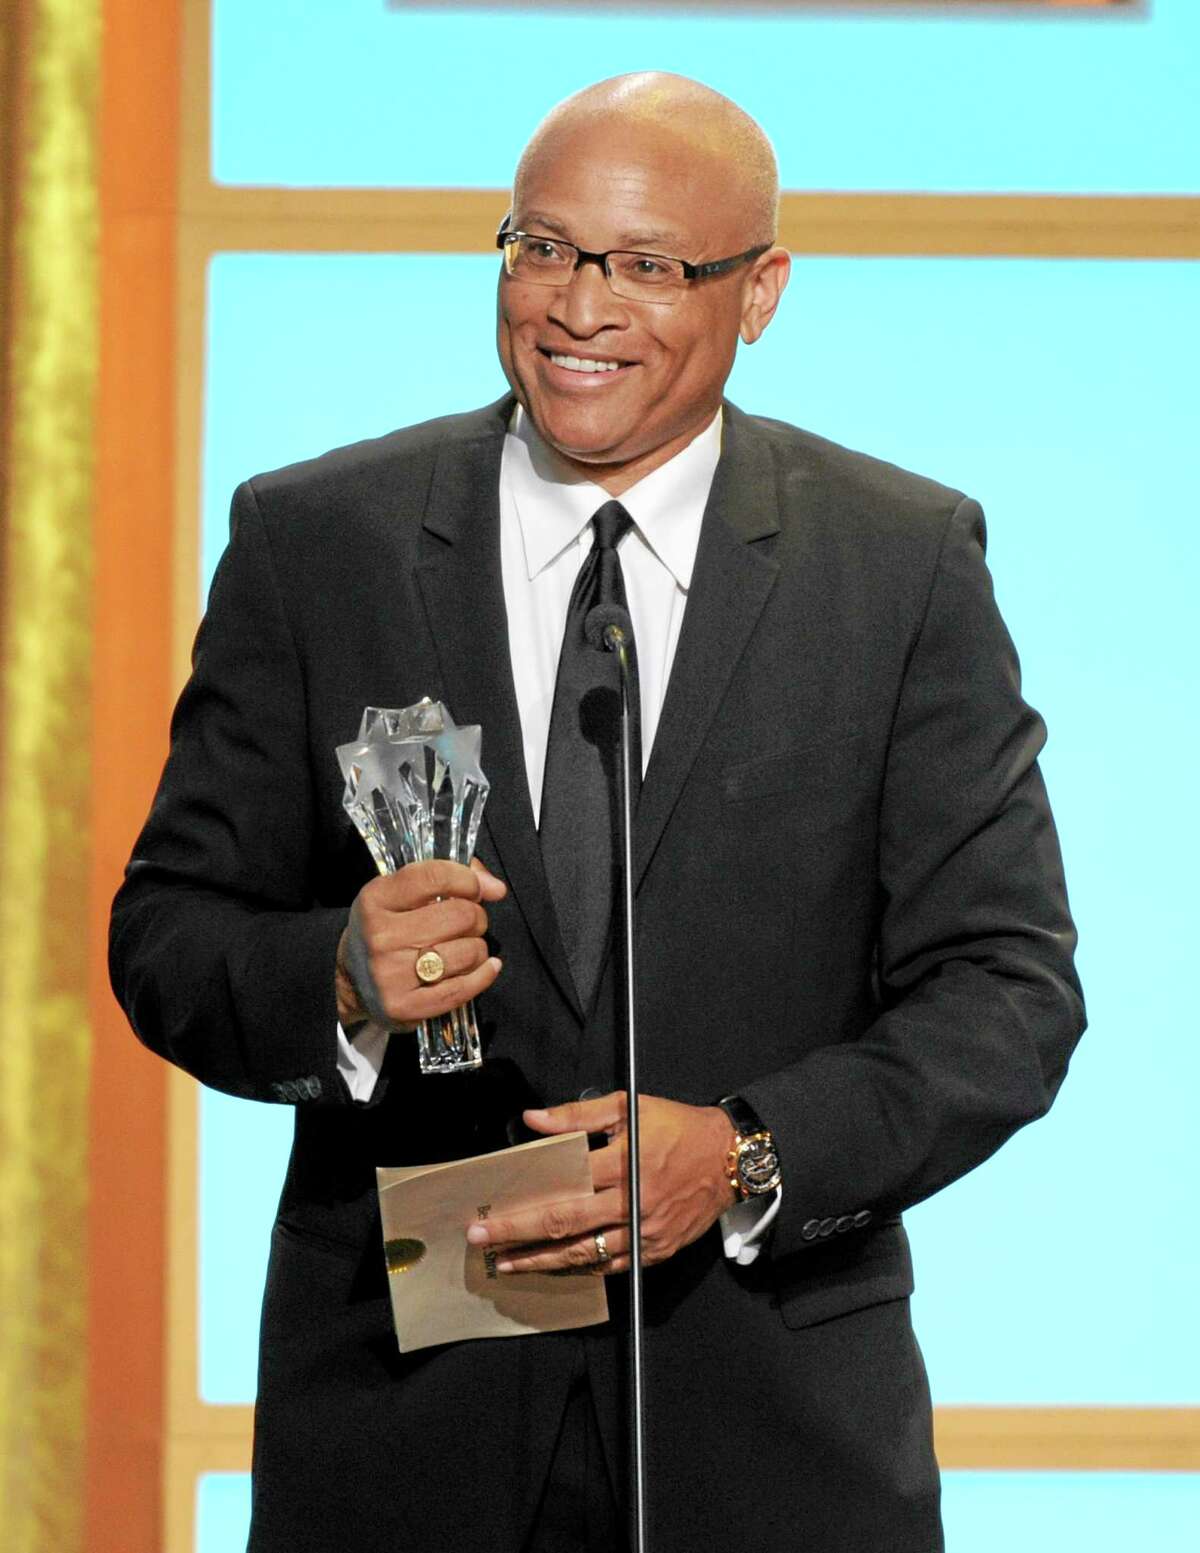 In this Monday, June 10, 2013, photo, Larry Wilmore accepts the best talk show award for “The Daily Show with Jon Stewart” at the Critics’ Choice Television Awards in the Beverly Hilton Hotel in Beverly Hills, Calif. Writer-comic Larry Wilmore of “The Daily Show” has earned Stephen Colbert’s coveted Comedy Central timeslot following Jon Stewart each night.